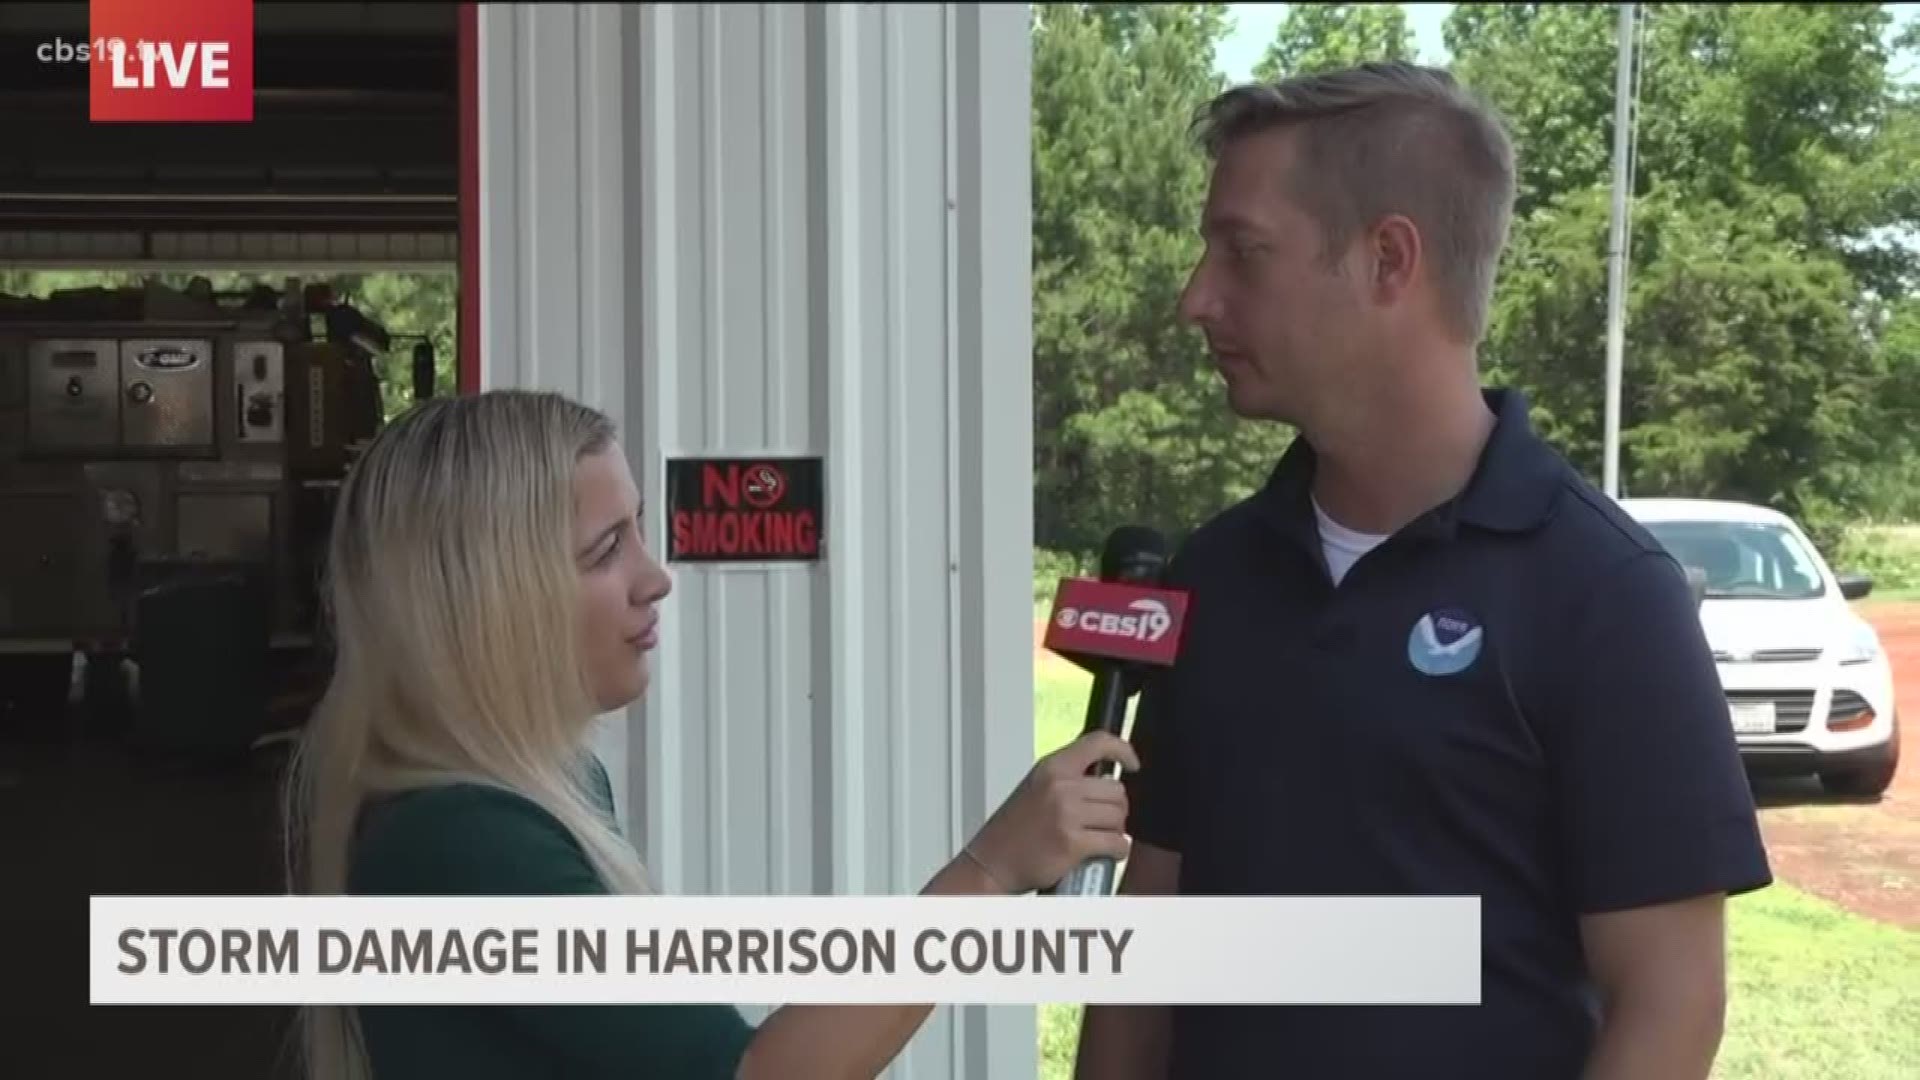 National Weather Service Meteorologist Charlie Woodrum confirms to CBS 19's Monica Ortiz that an EF-0 Tornado touched down in Harrison County near Nesbitt.